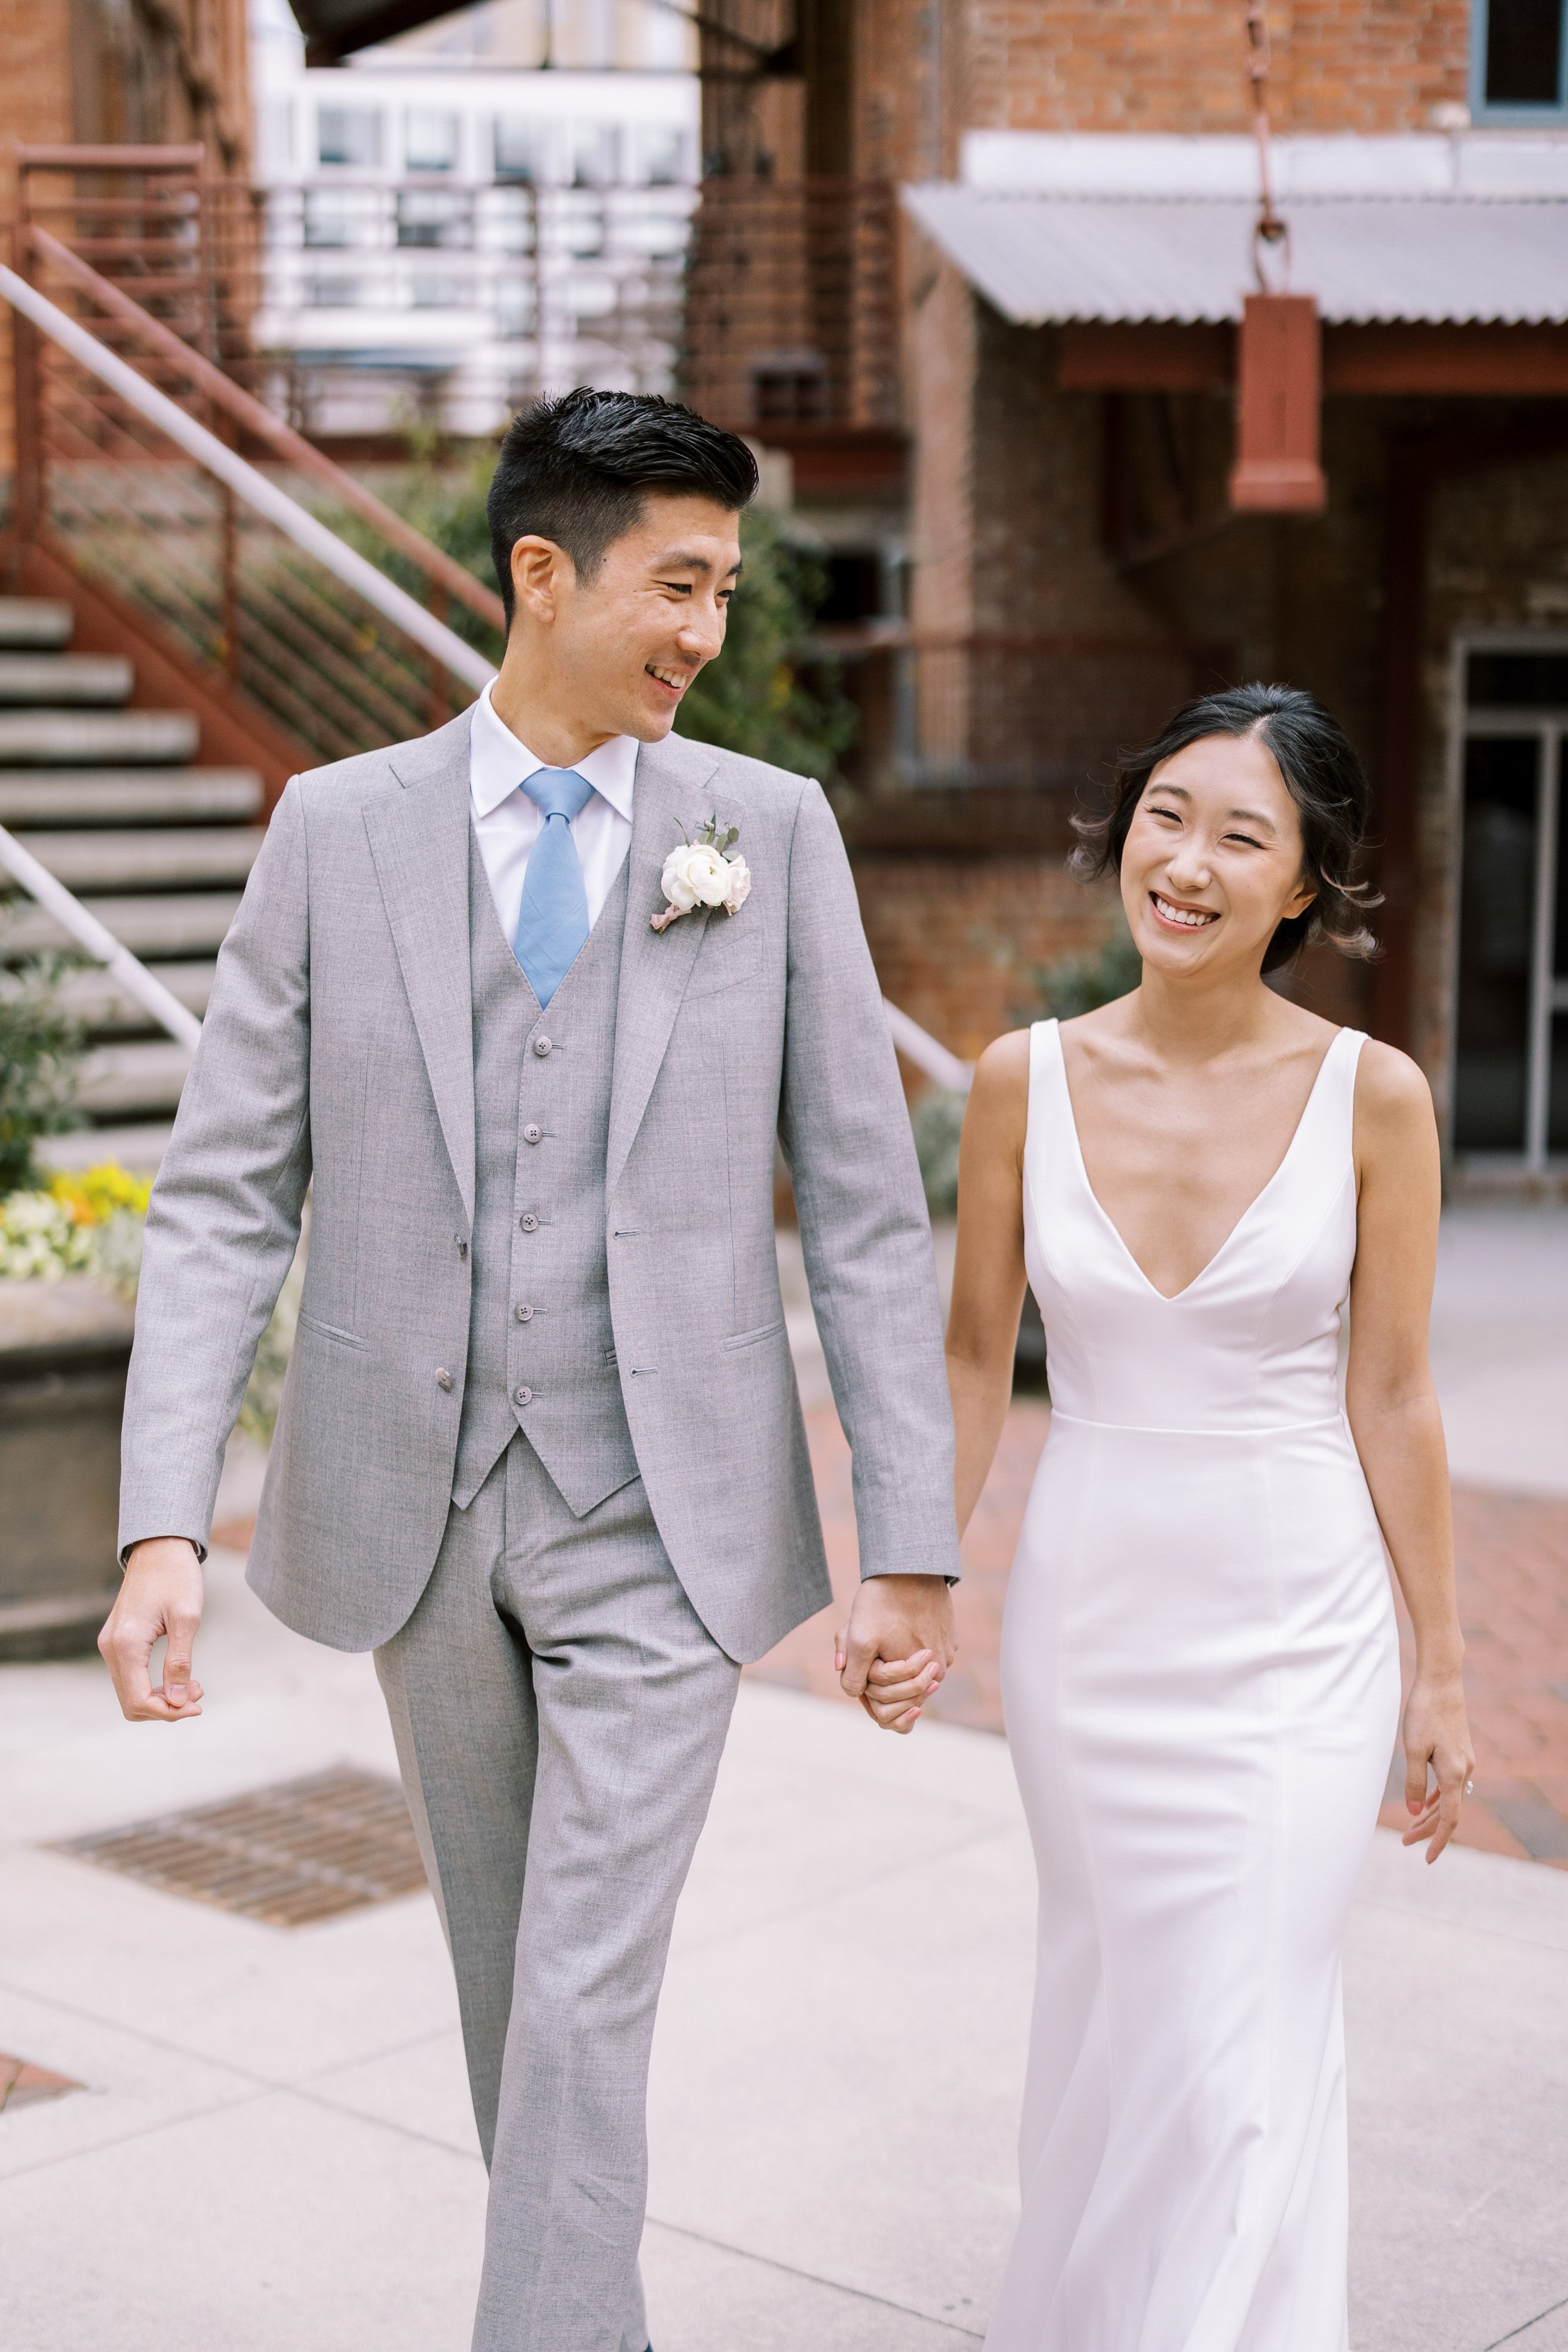 The Best Durham NC Wedding Photographer American Tobacco Campus Wedding at Bay 7 Durham NC Fancy This Photography